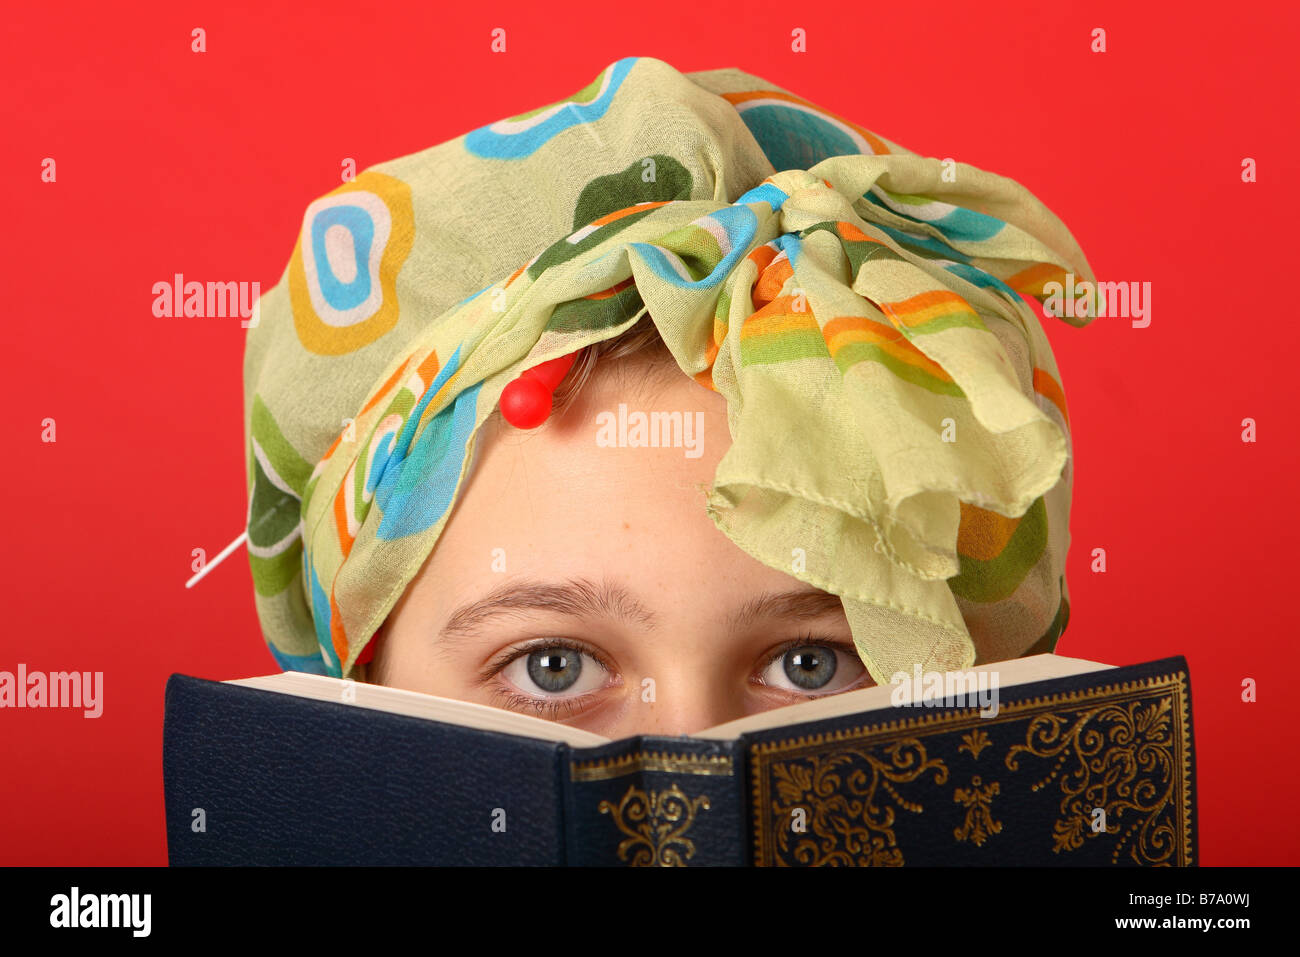 Teenage girl wearing hair curlers and head scarf looking old fashioned reading a book Stock Photo